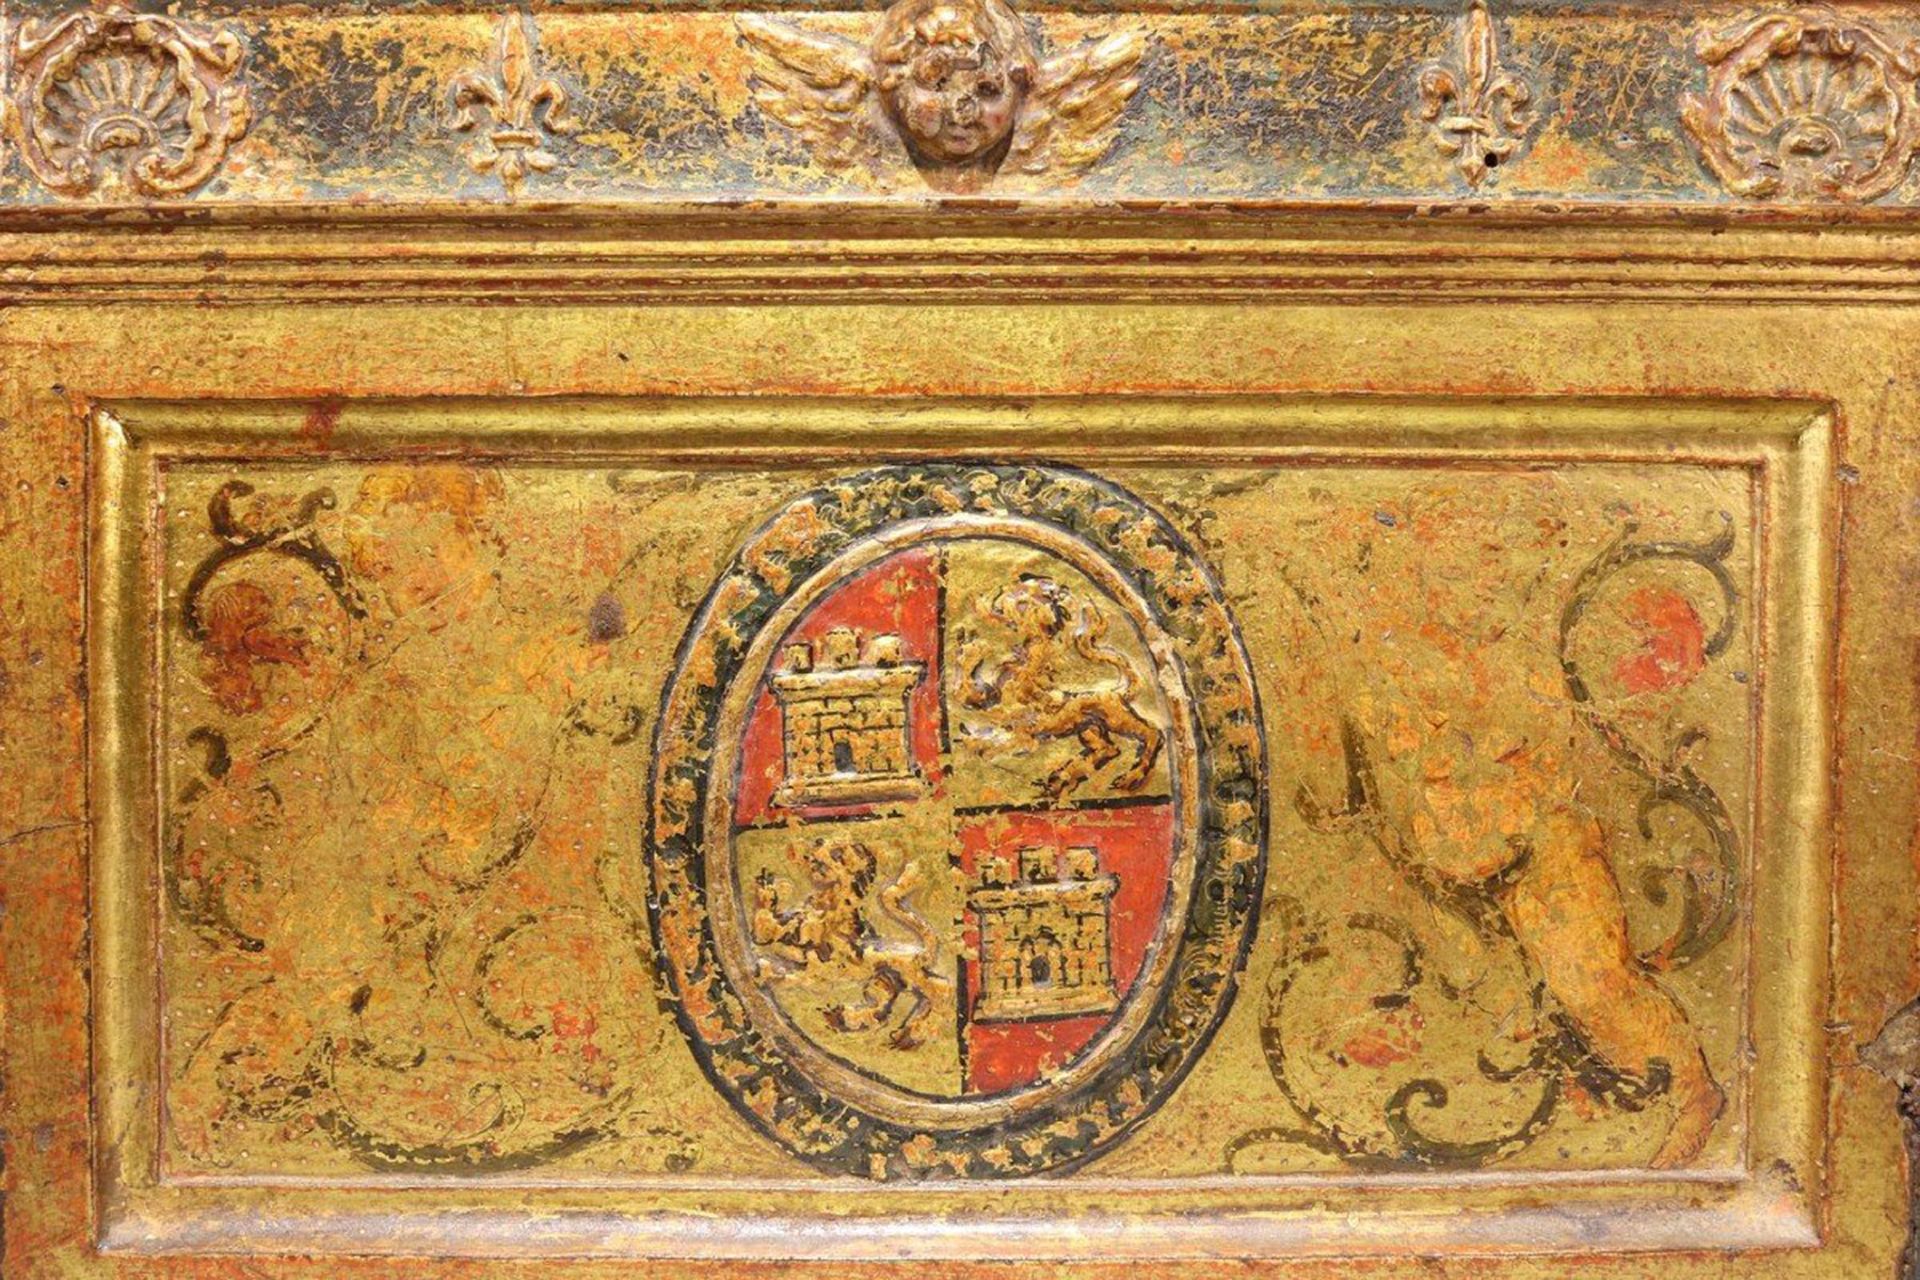 Rare Italian Medical Chest of the Renaissance, Milan or Vizcaya, made by the house of Medinaceli, he - Image 6 of 10